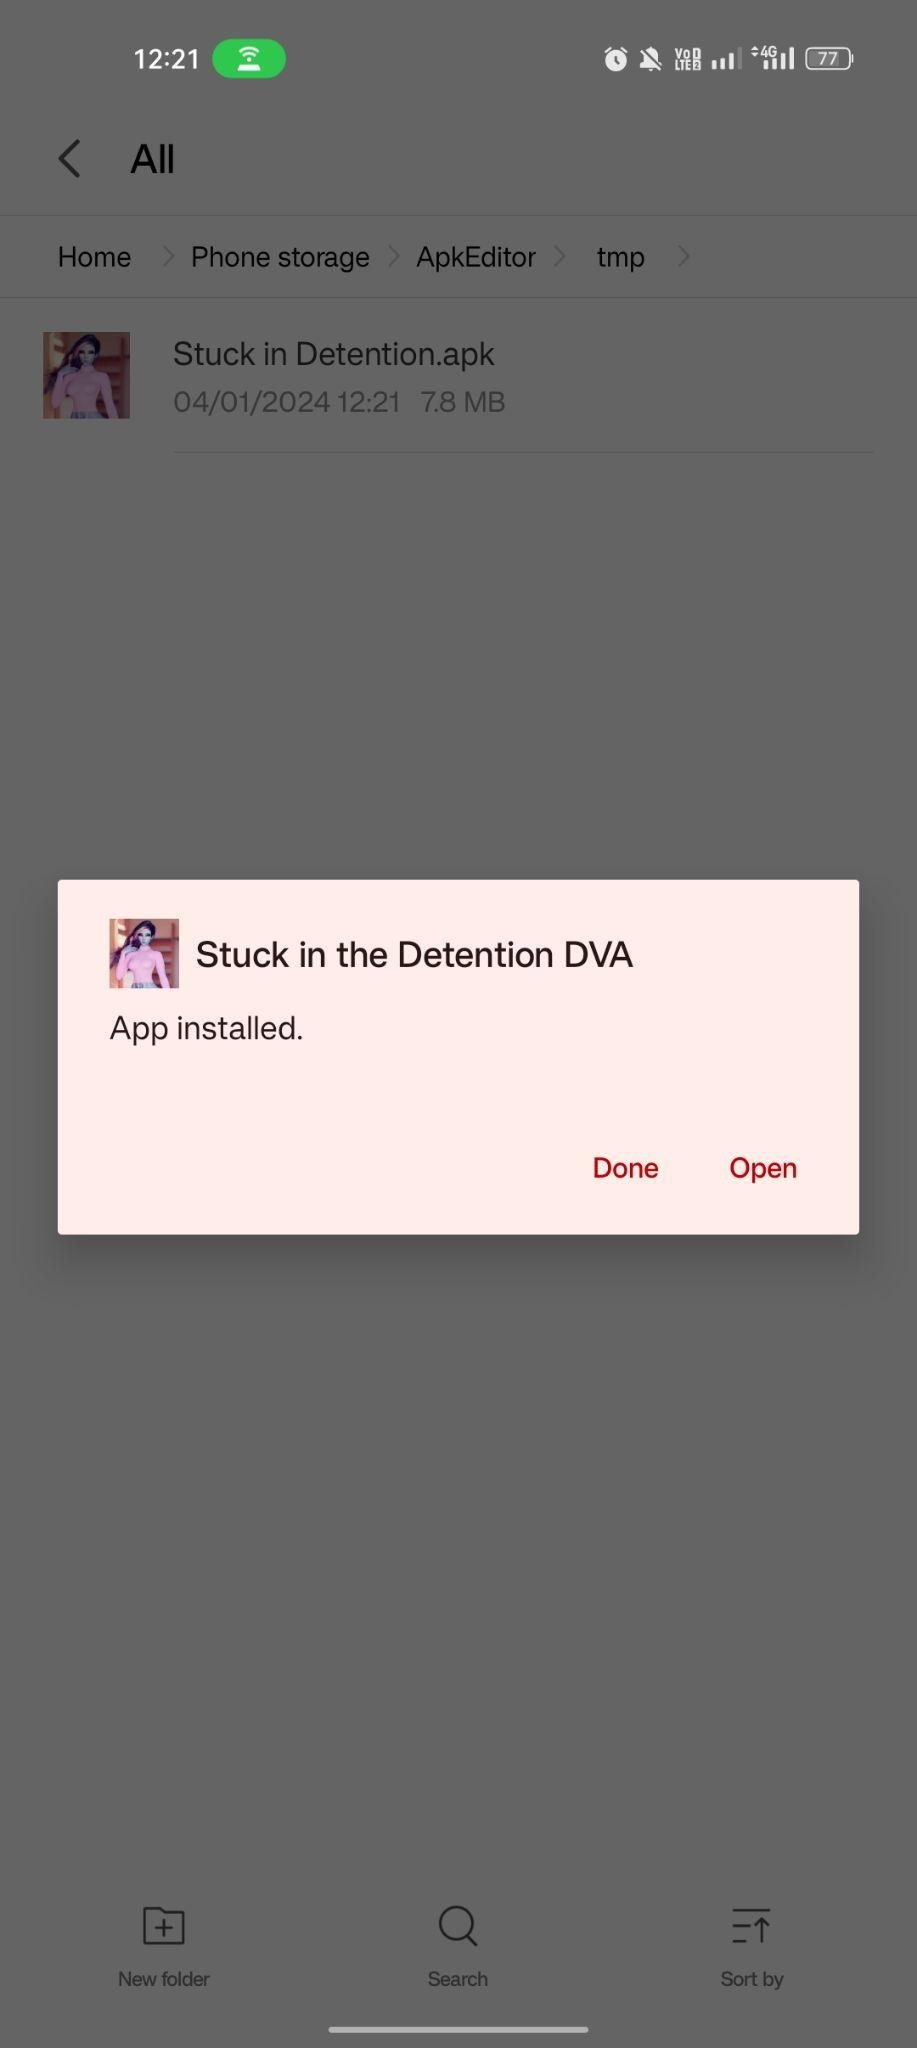 Stuck in Detention with DVA apk installed